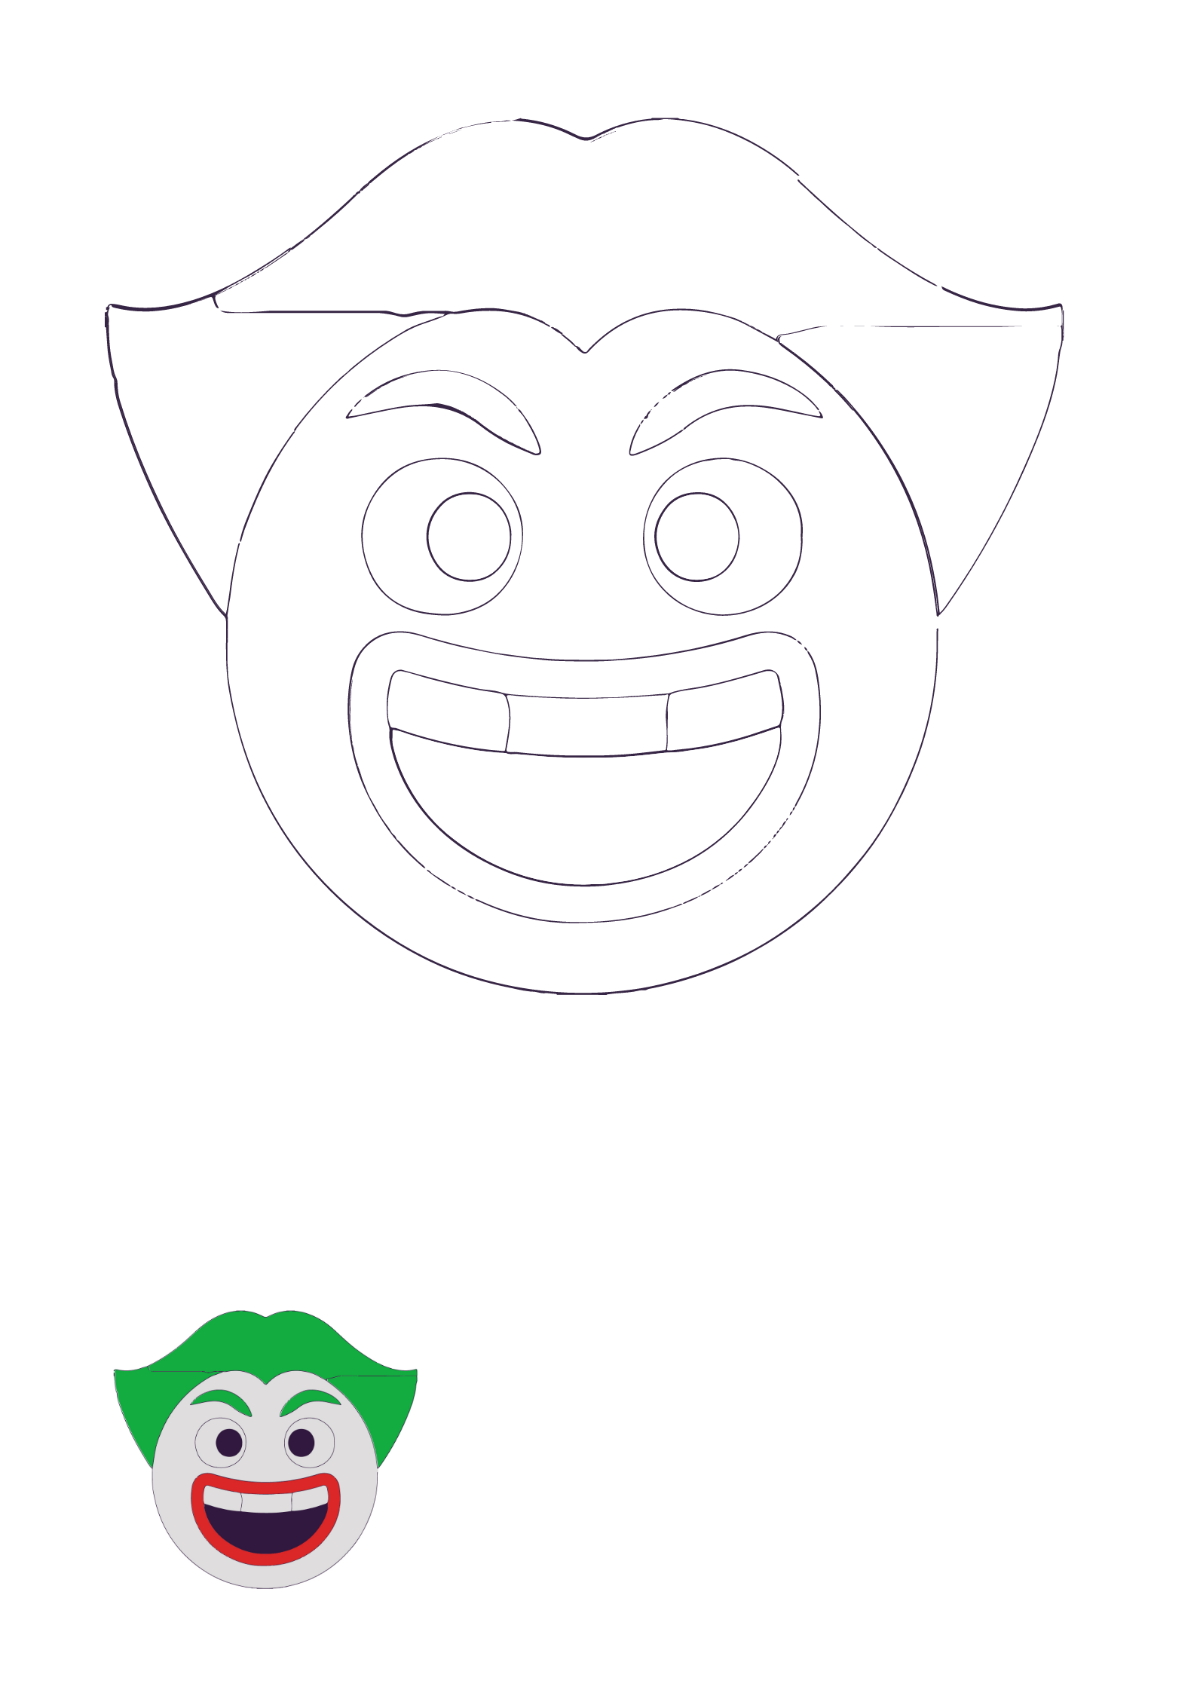 Joker Smiley Coloring Page